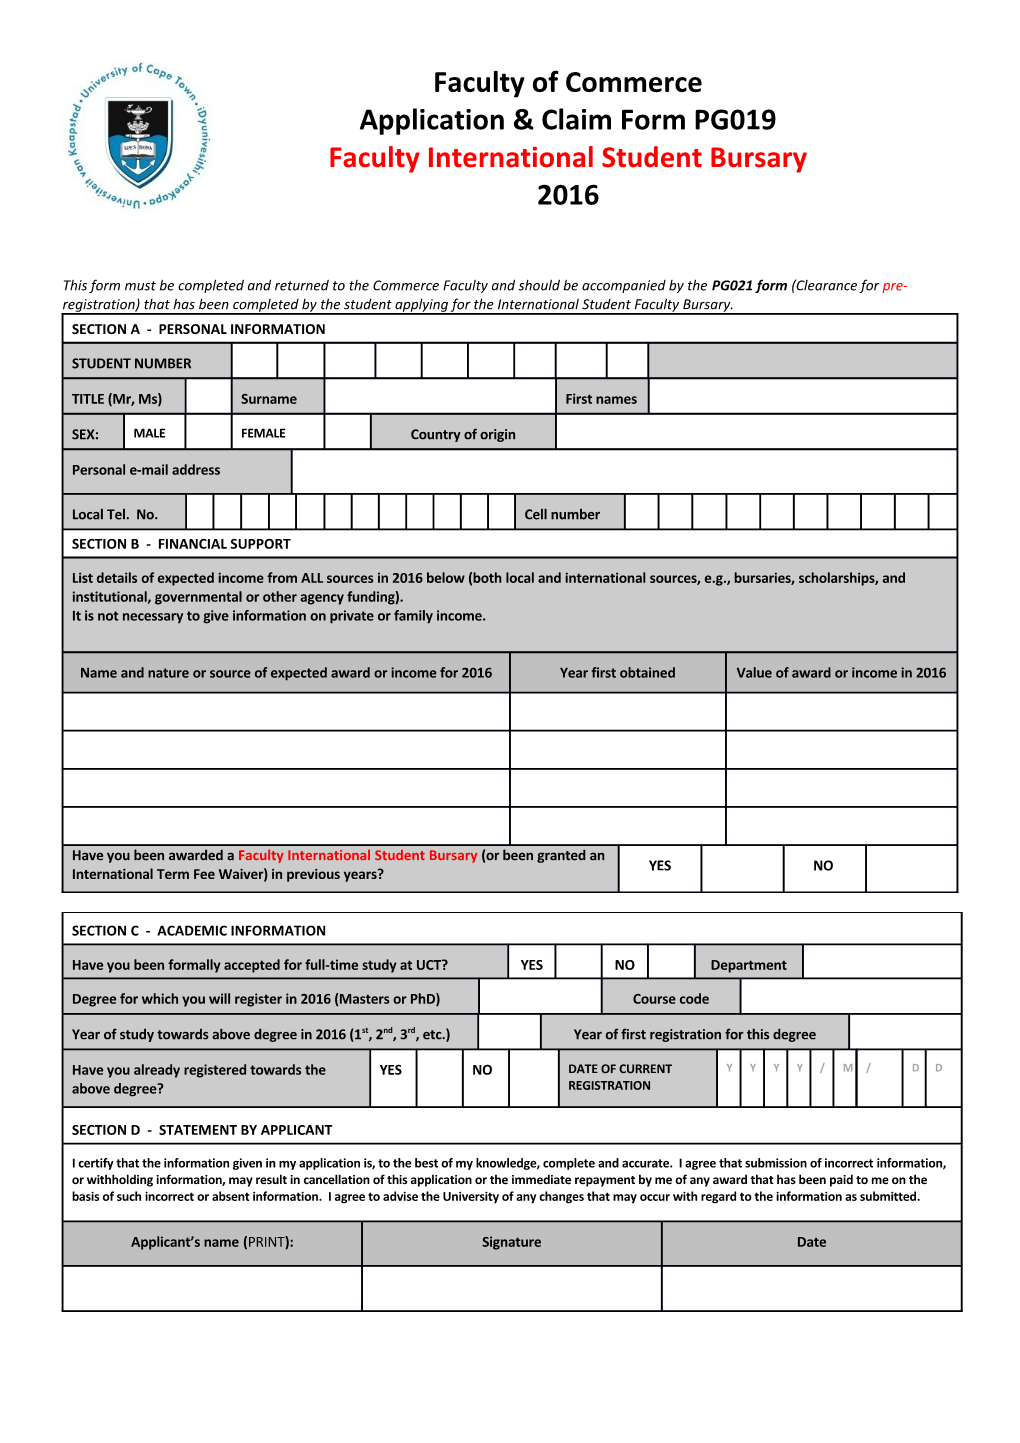 This Form Must Be Completed and Returned to the Commerce Faculty and Should Be Accompanied